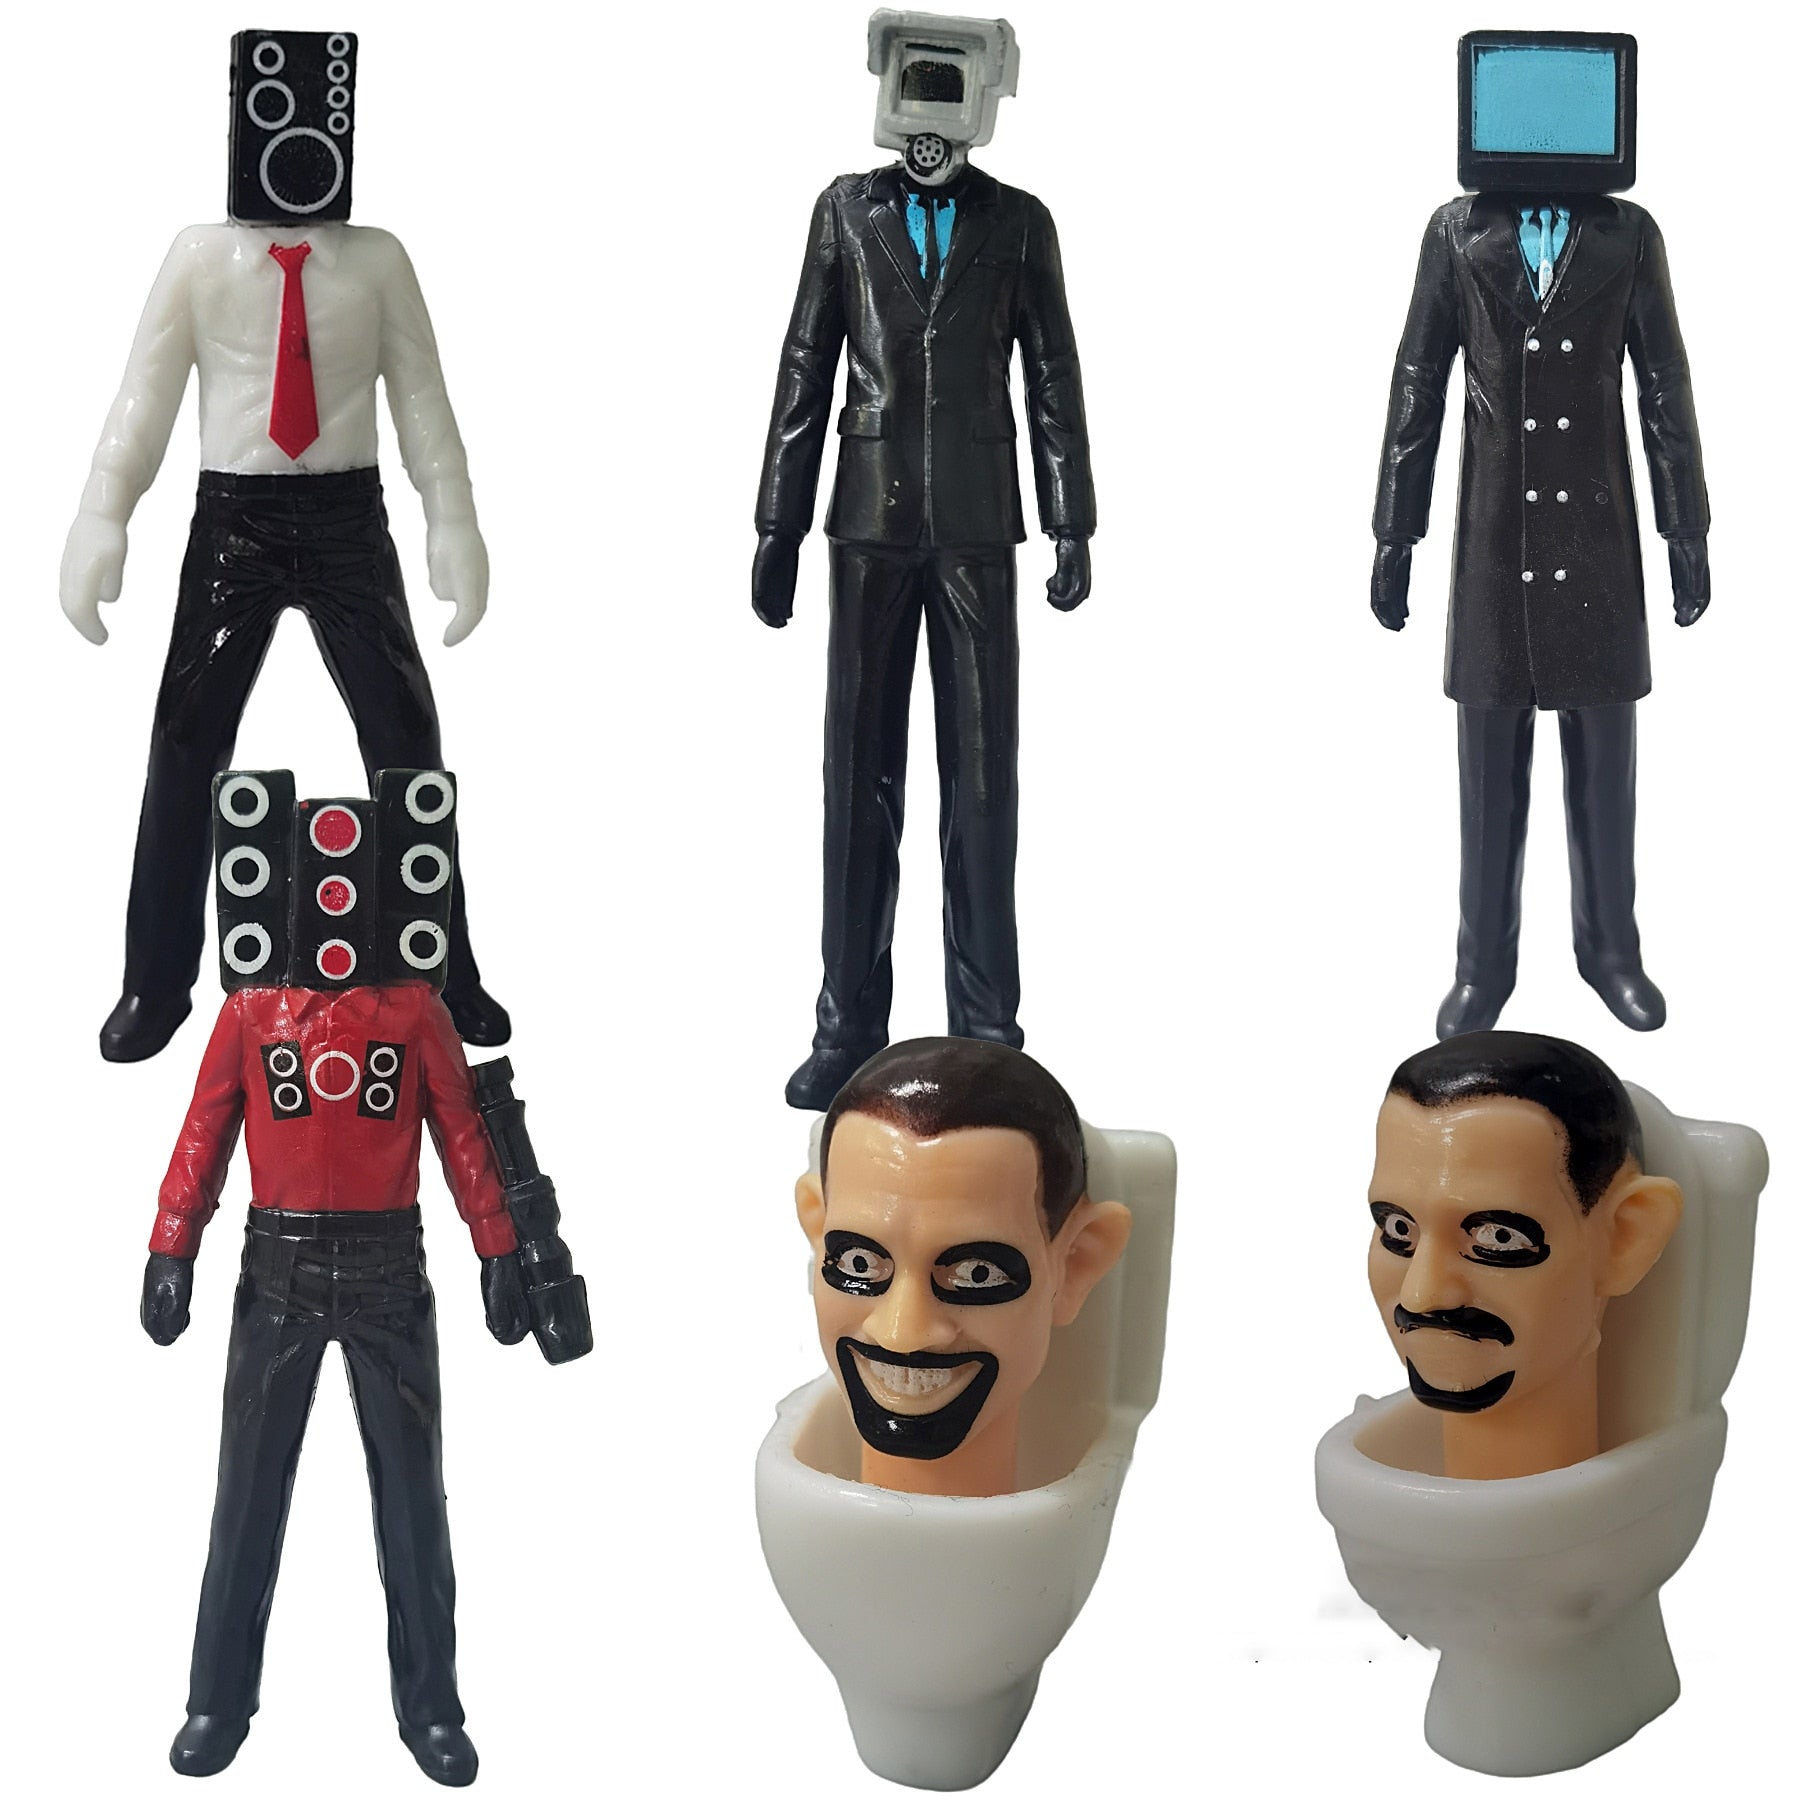 Skibidi Toilet Action Figure Set: A Fun and Quirky Gift for Kids of All Ages